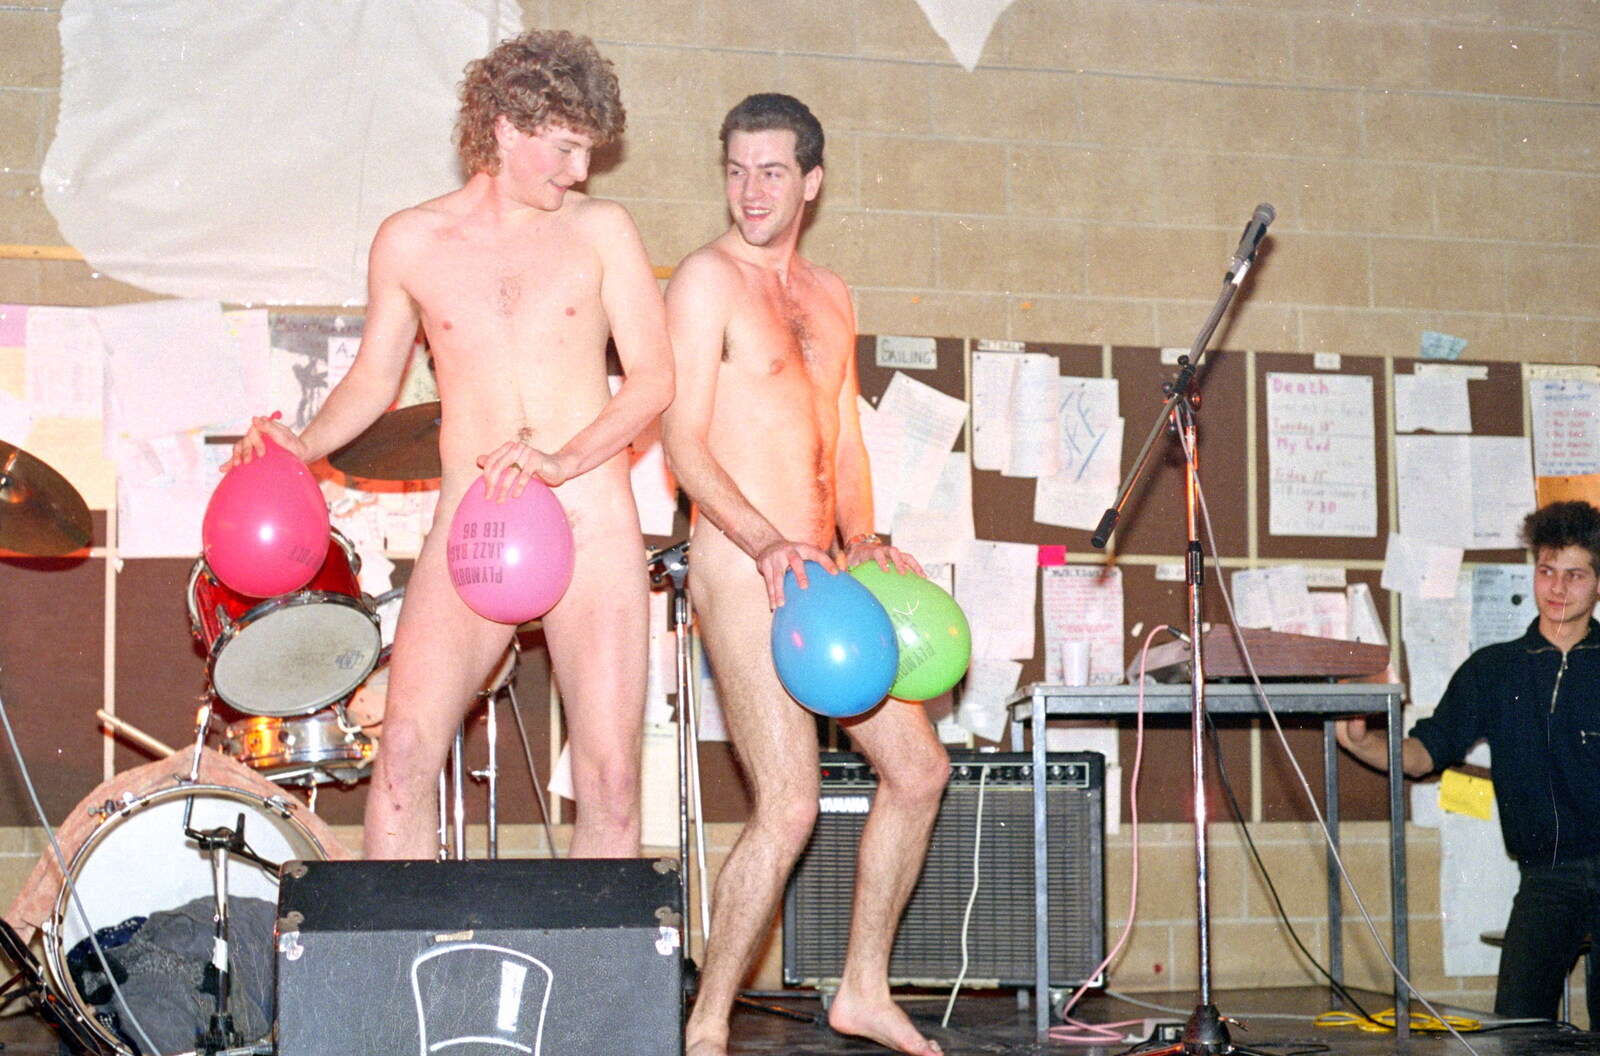 The balloon dance gets risqué from Uni: The PPSU "Jazz" RAG Review and Charity Auction, Plymouth, Devon - 19th February 1986